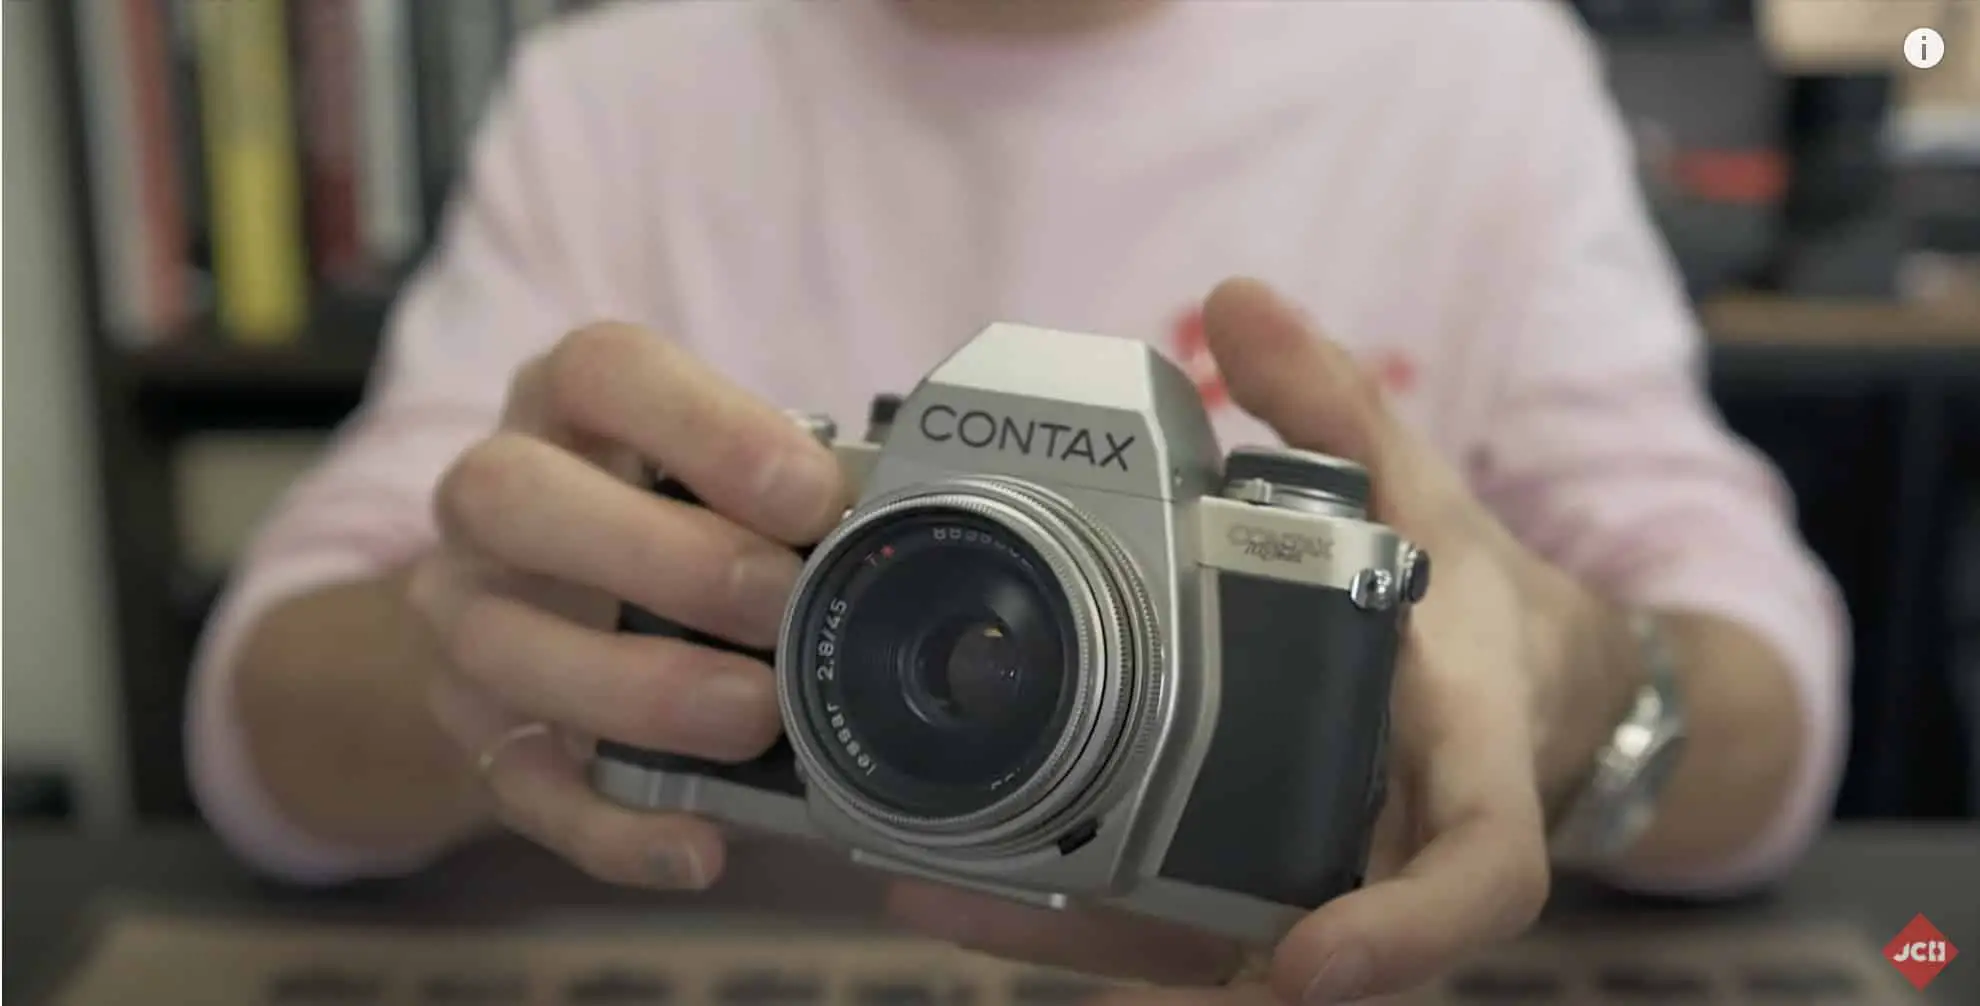 The JCH Youtube Channel: Contax Aria 70th Anniversary